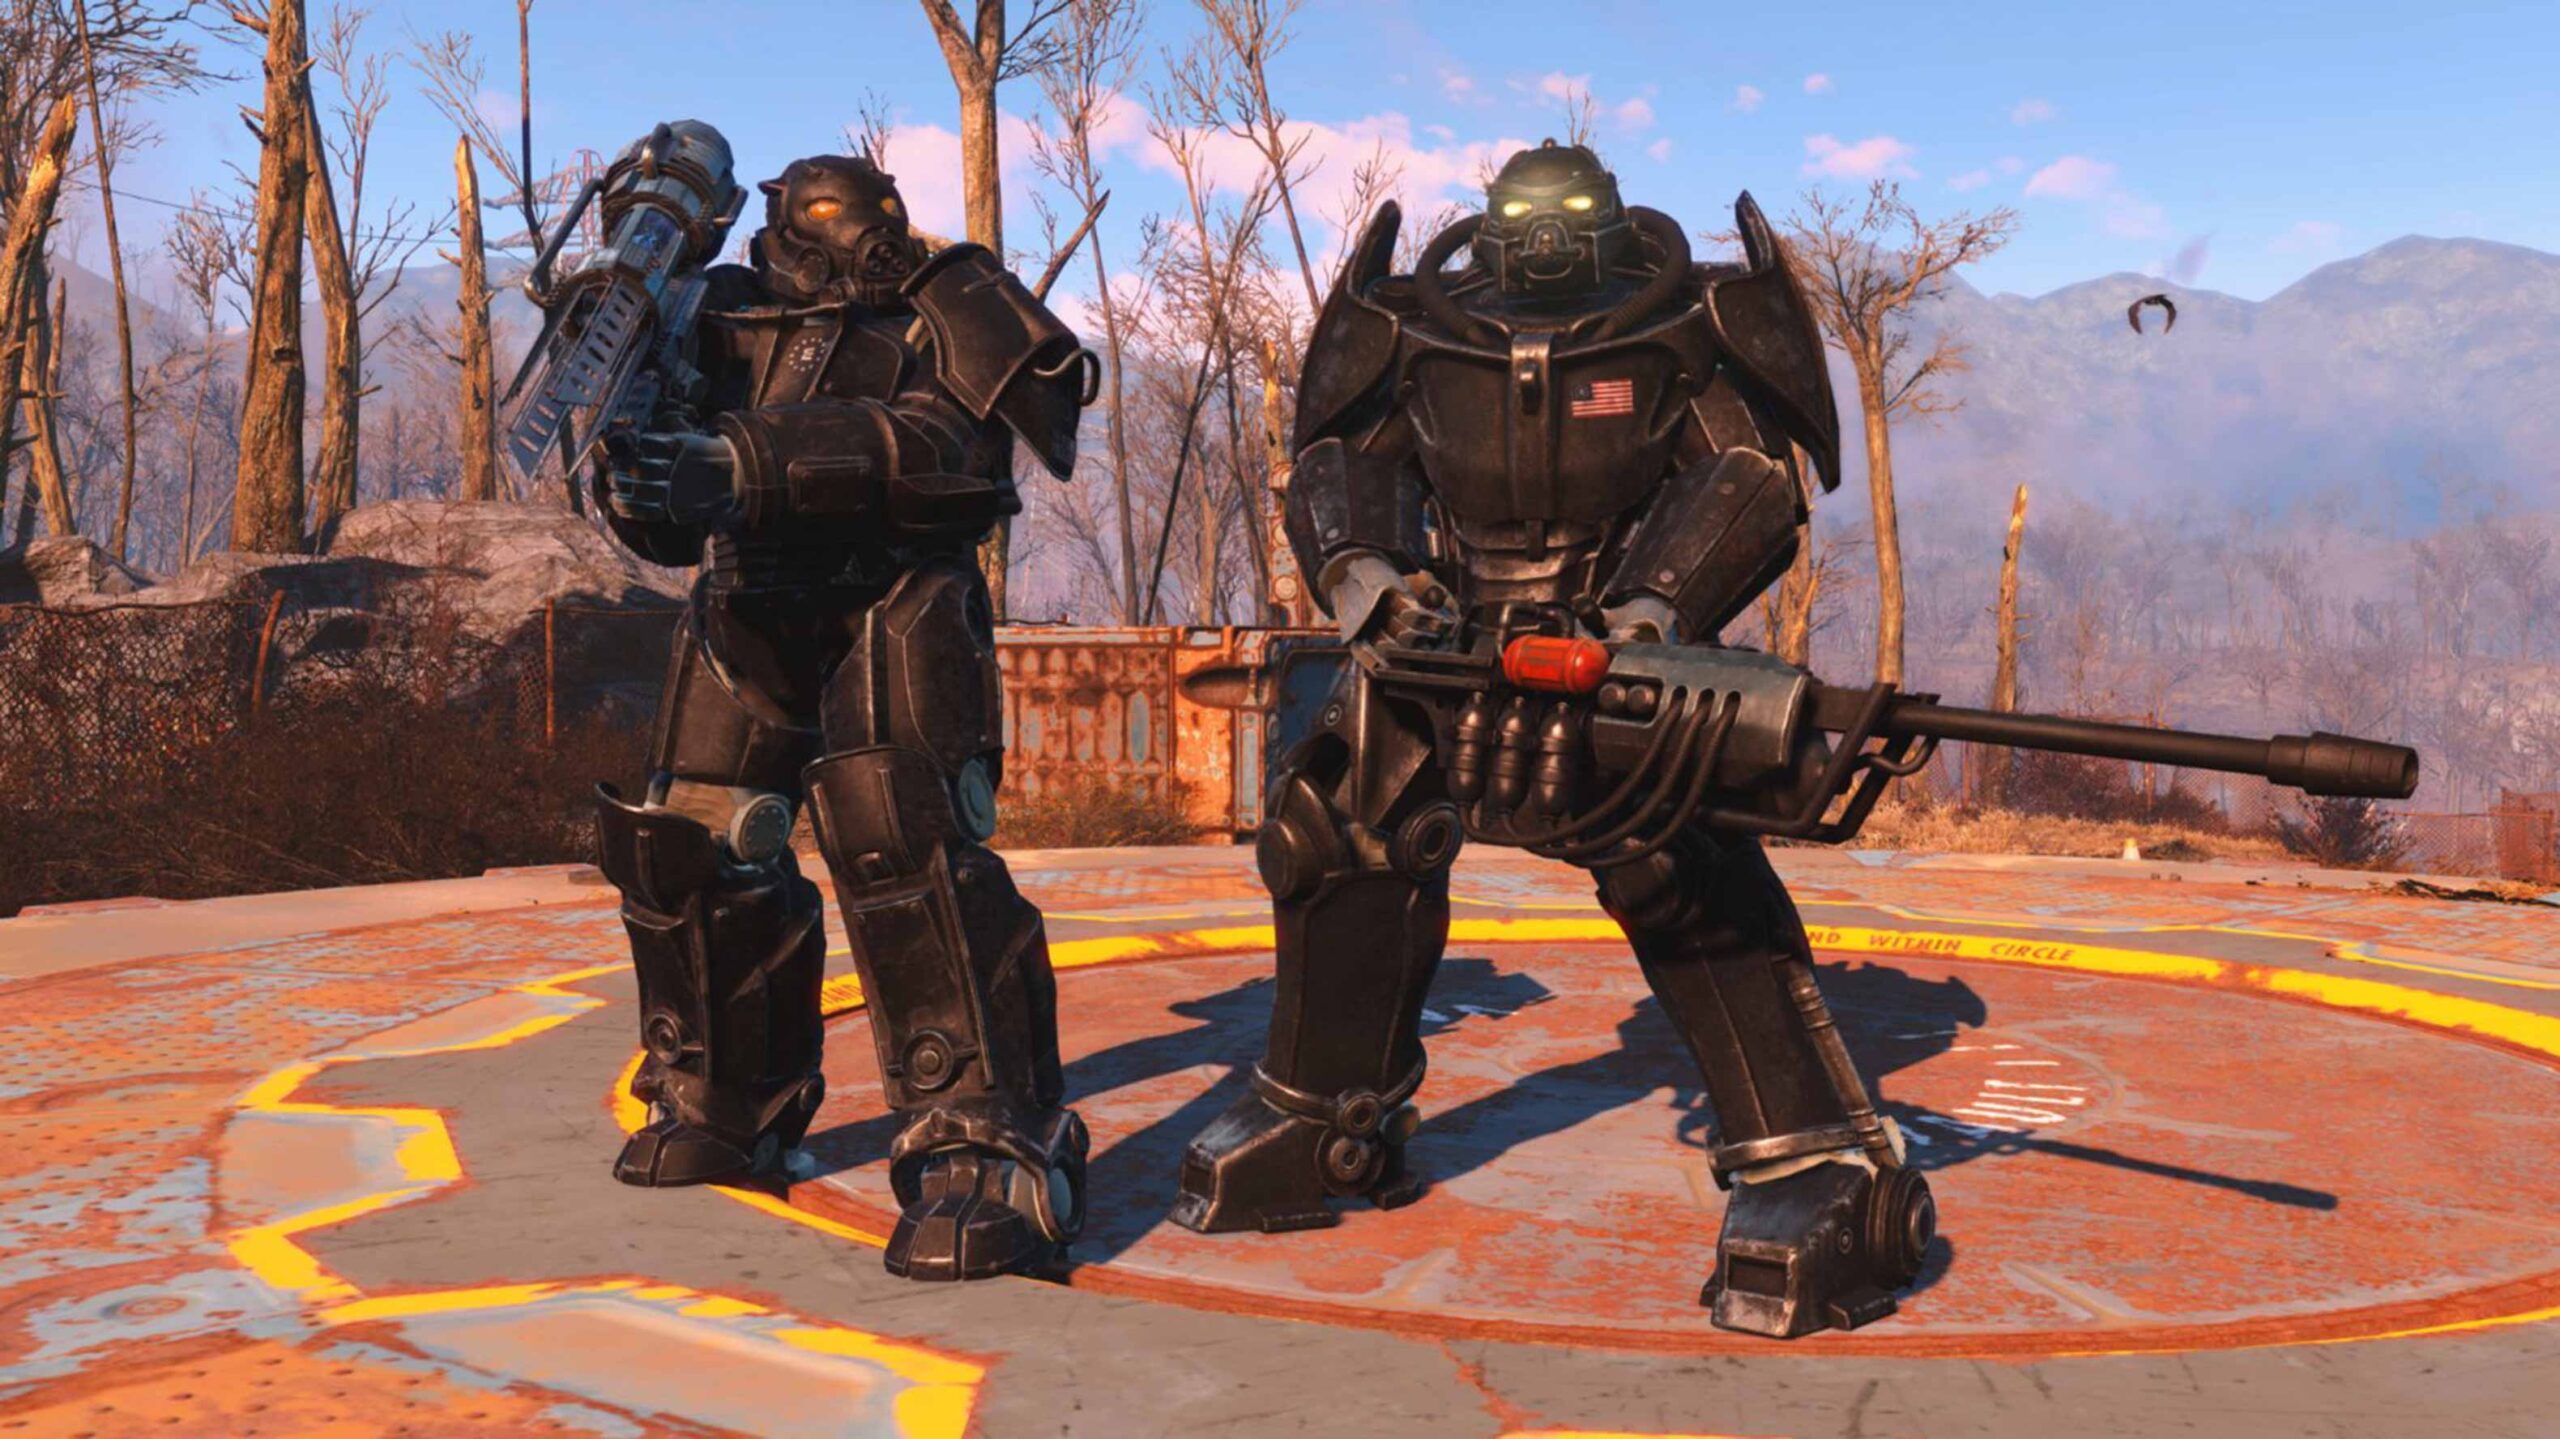 Busted Fallout 4 next-gen update brings the Bethesda charm (jank) to new players thumbnail